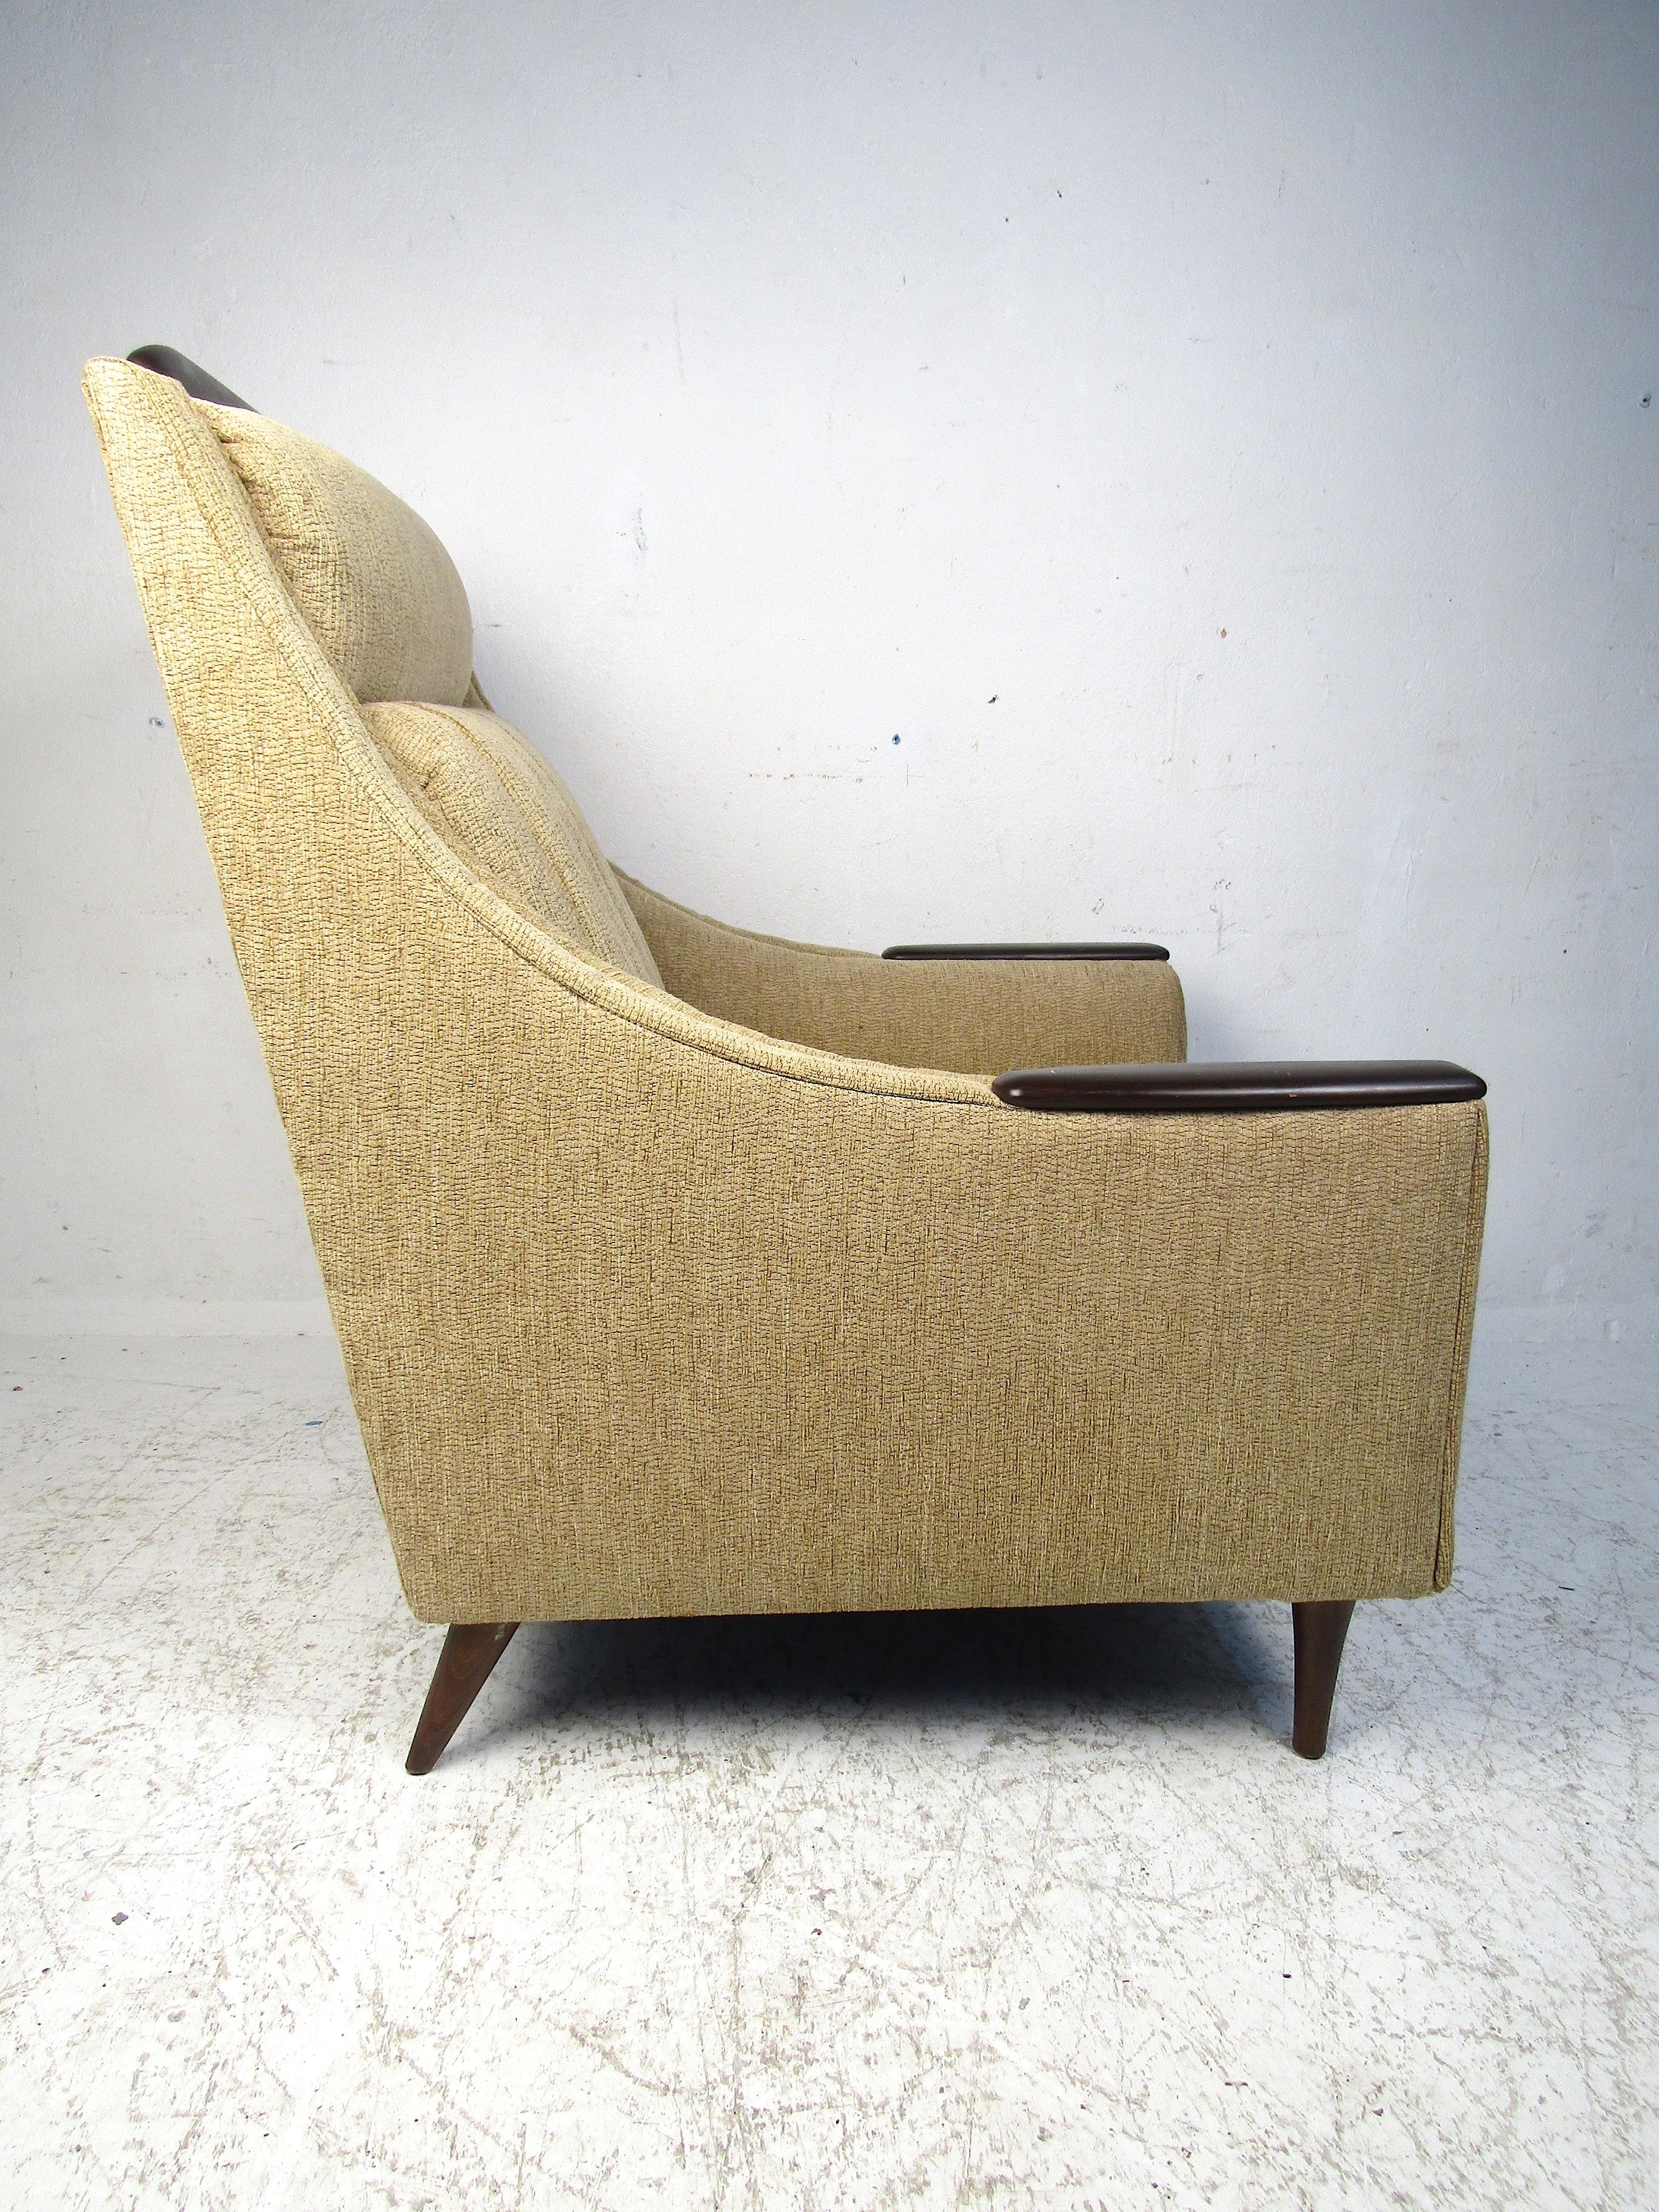 Midcentury Lounge Chair In Good Condition For Sale In Brooklyn, NY